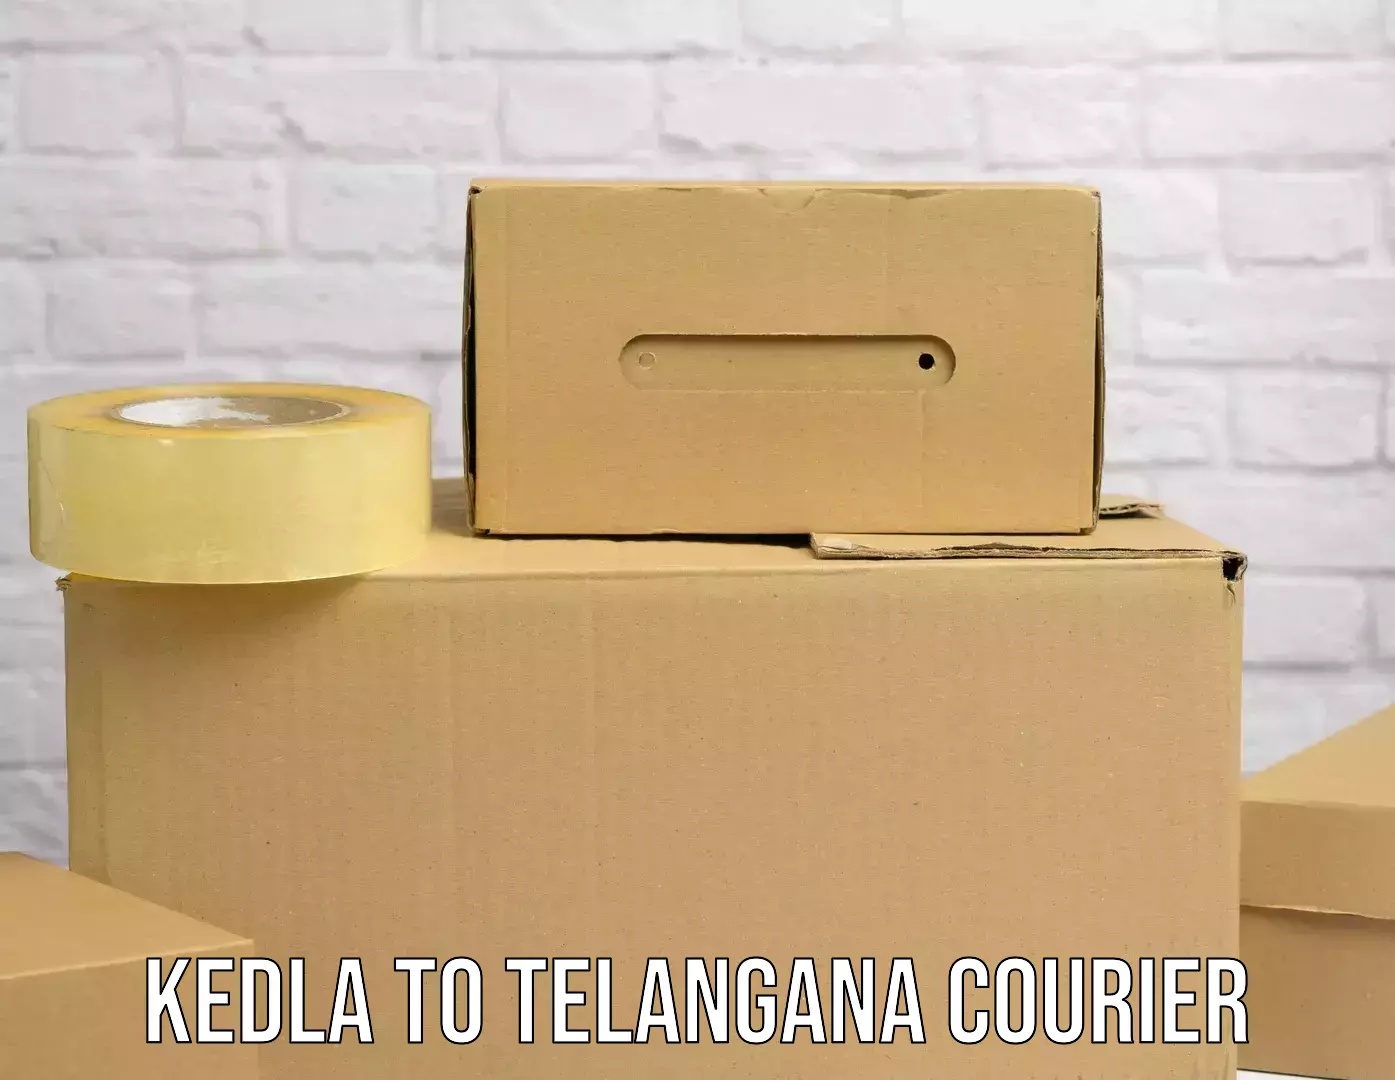 Quality courier partnerships Kedla to Ghanpur